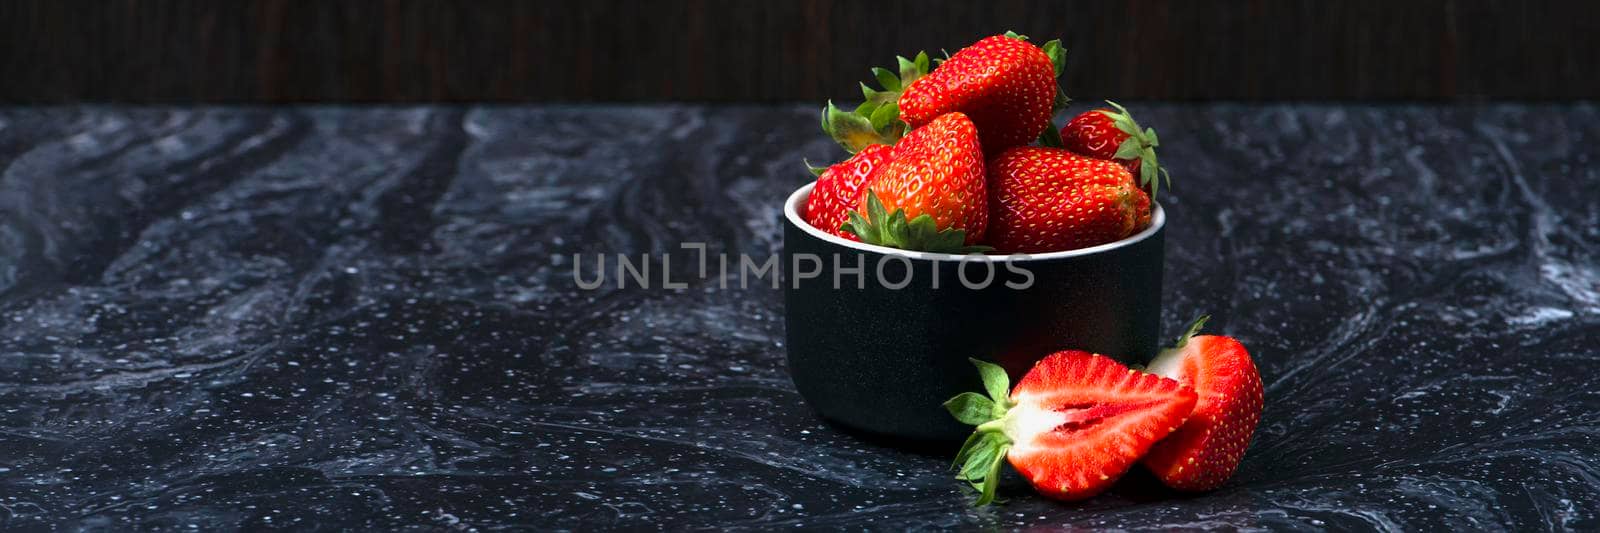 Strawberries on black marble. Ripe strawberries in a saucer on a black background. Place to insert text by SERSOL